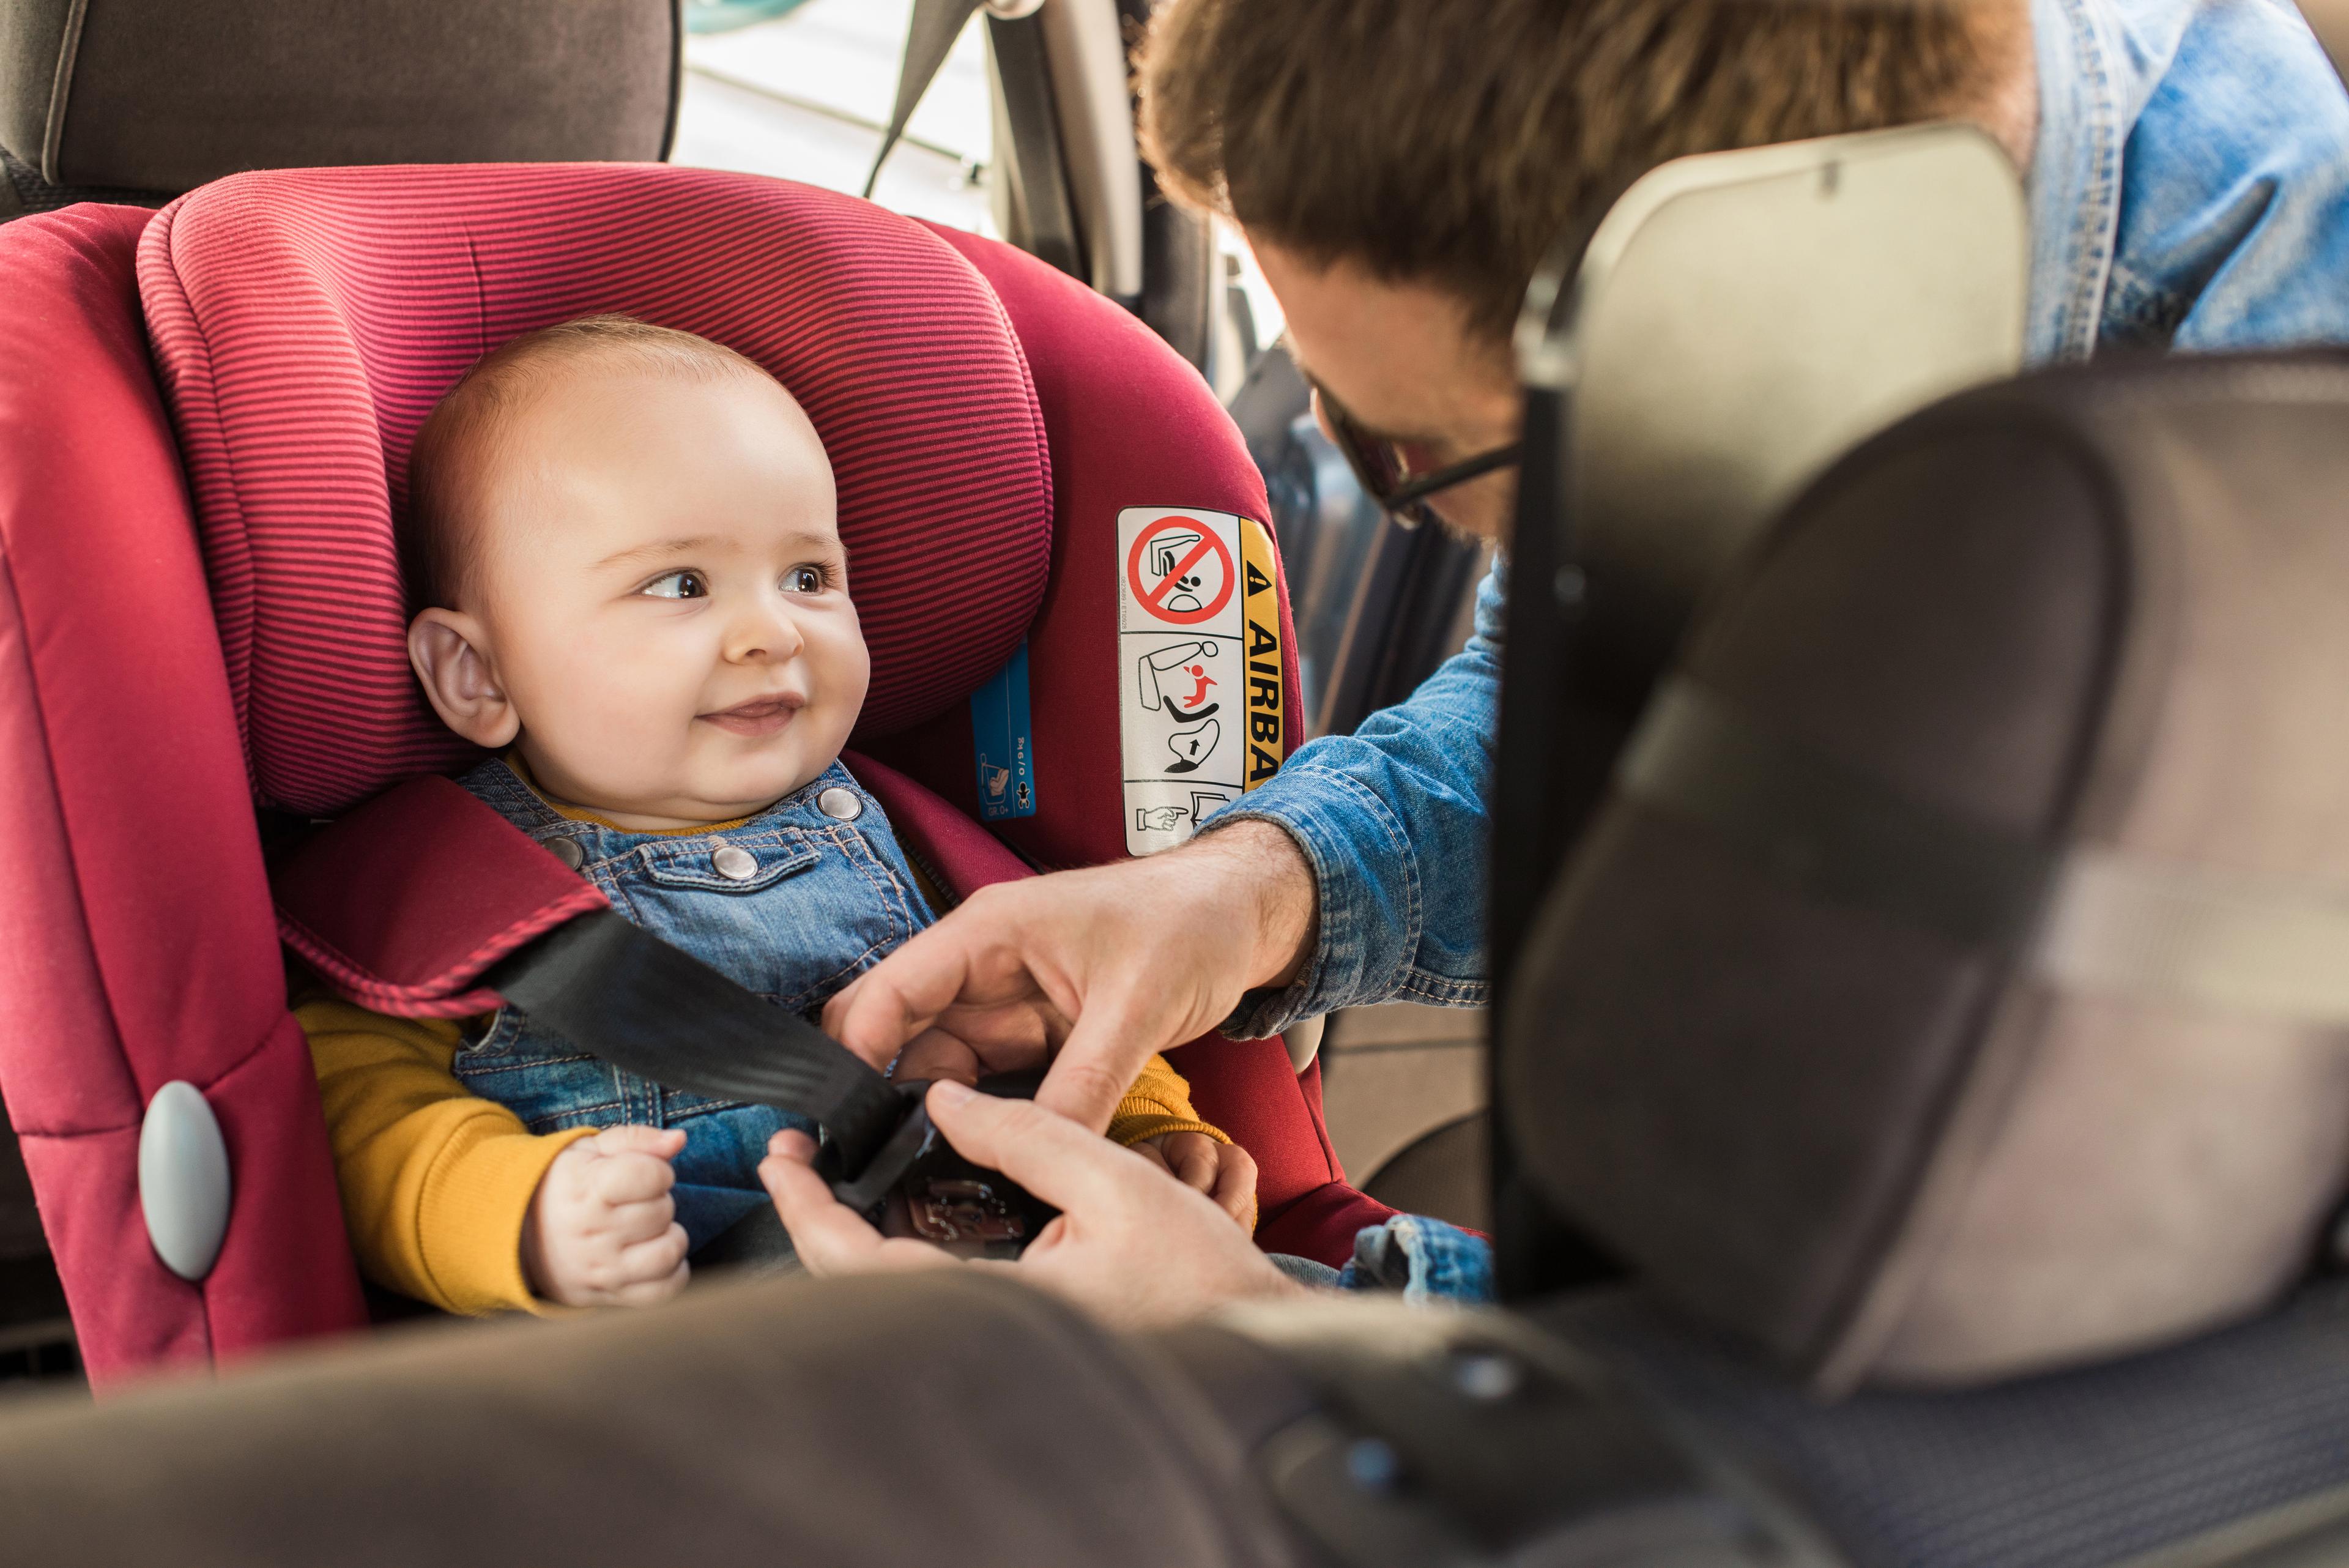 A smiling baby being strapped into an ISOFIX carseat